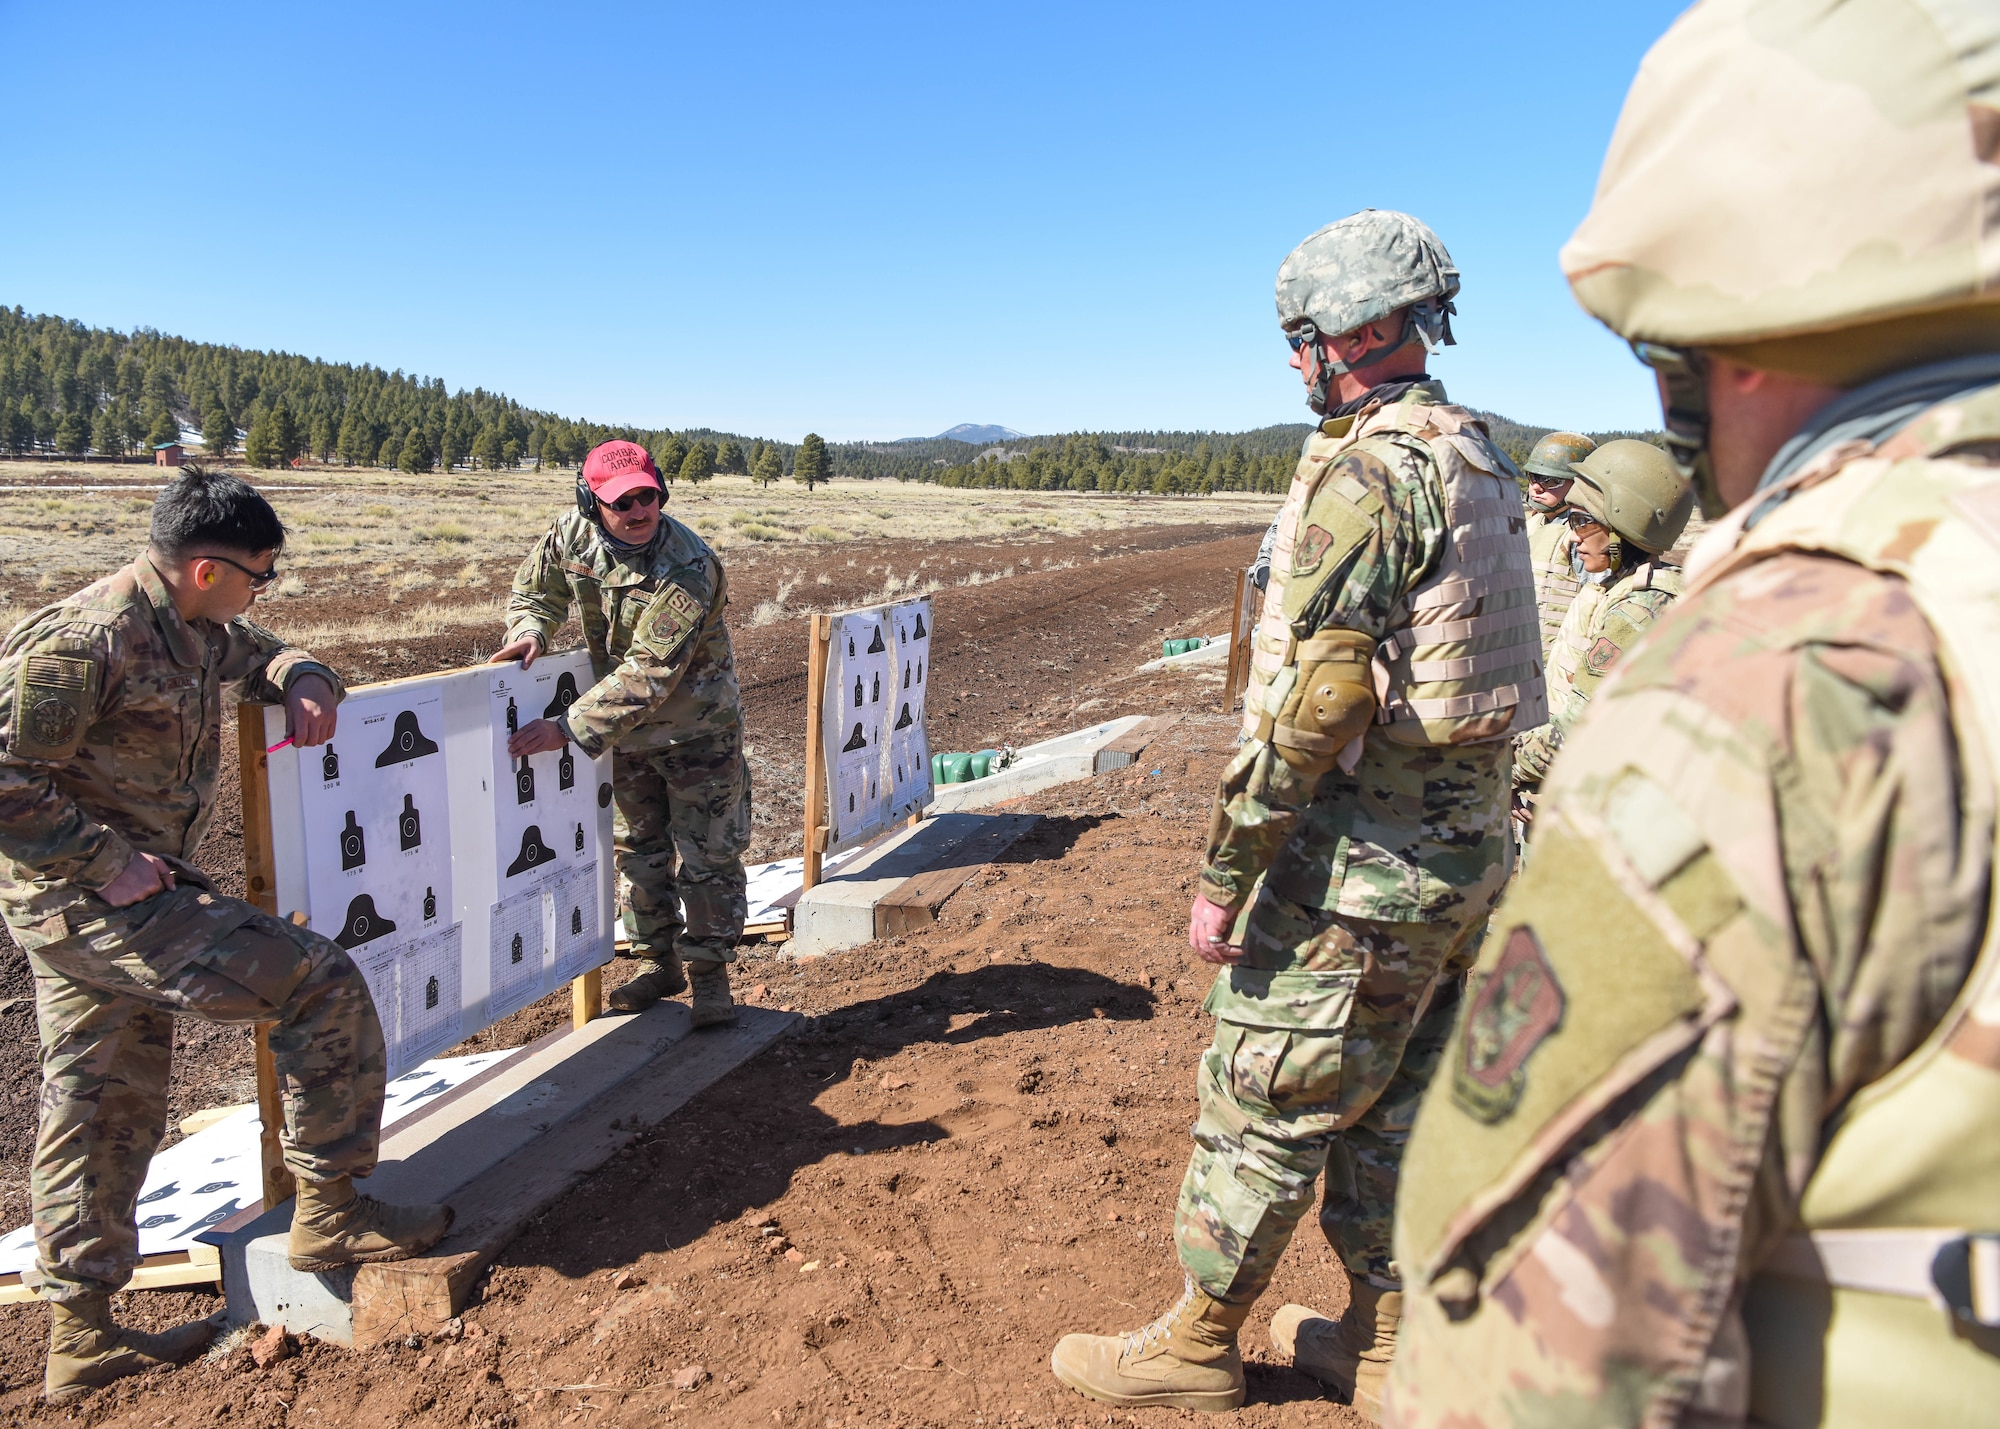 Master Sgt. Jerry Guerra, 944th Security Forces Squadron combat arms superintendent, gives trainees advice on improving their aim during a deployment training exercise, March 6, 2021 at Camp Navajo, Bellemont, Arizona. The first-of-its-kind exercise was conducted by the 944th MSG, aimed at bringing together four different squadrons with different missions in a simulated deployed environment.